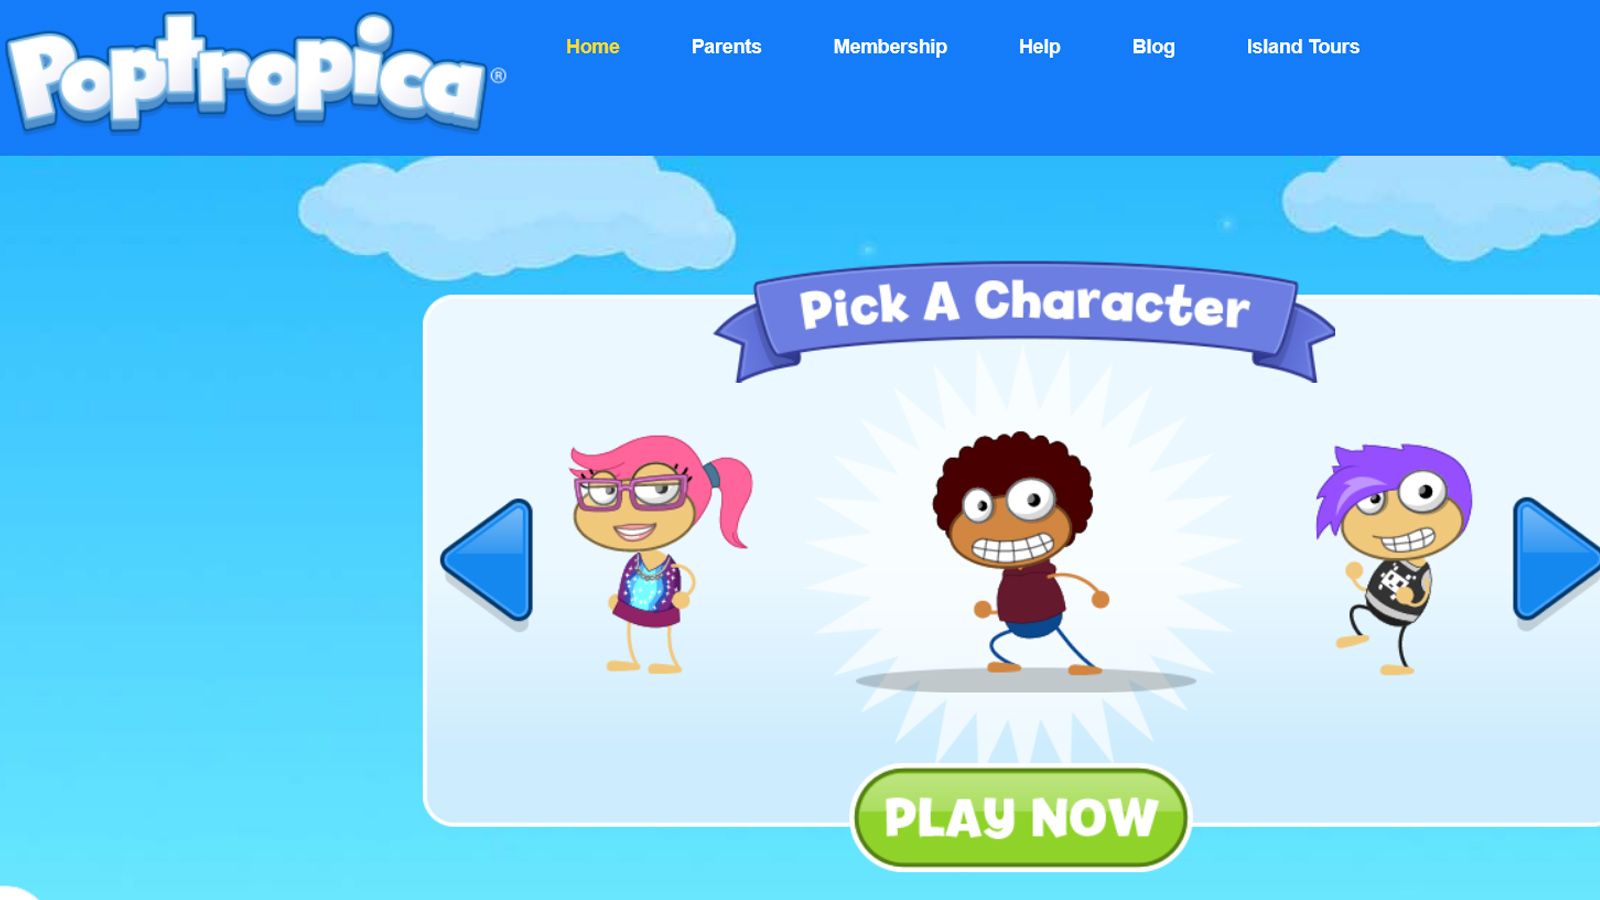 Find detailed information about Poptropica